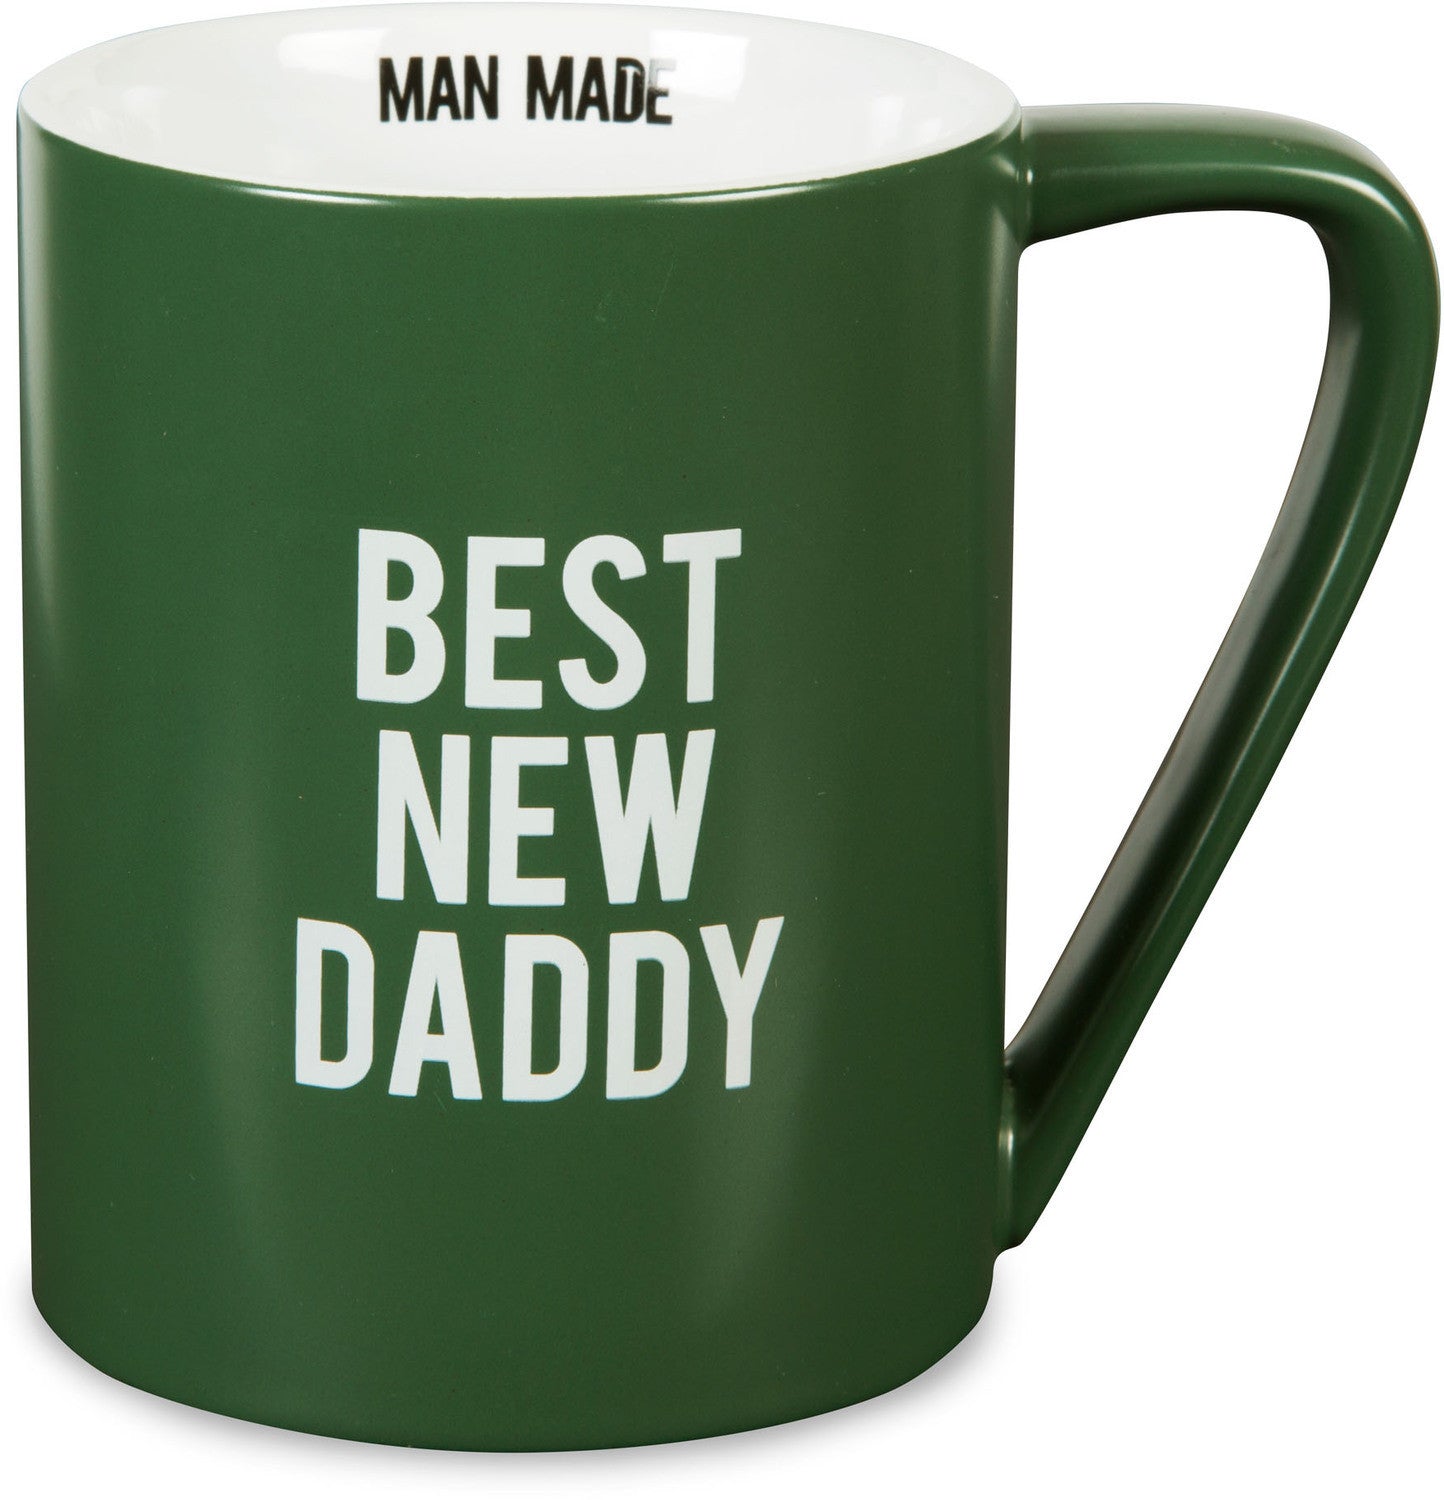 1 of 2: Best New Daddy Ceramic Mug (Man Made) by Pavilion Gifts (Front)